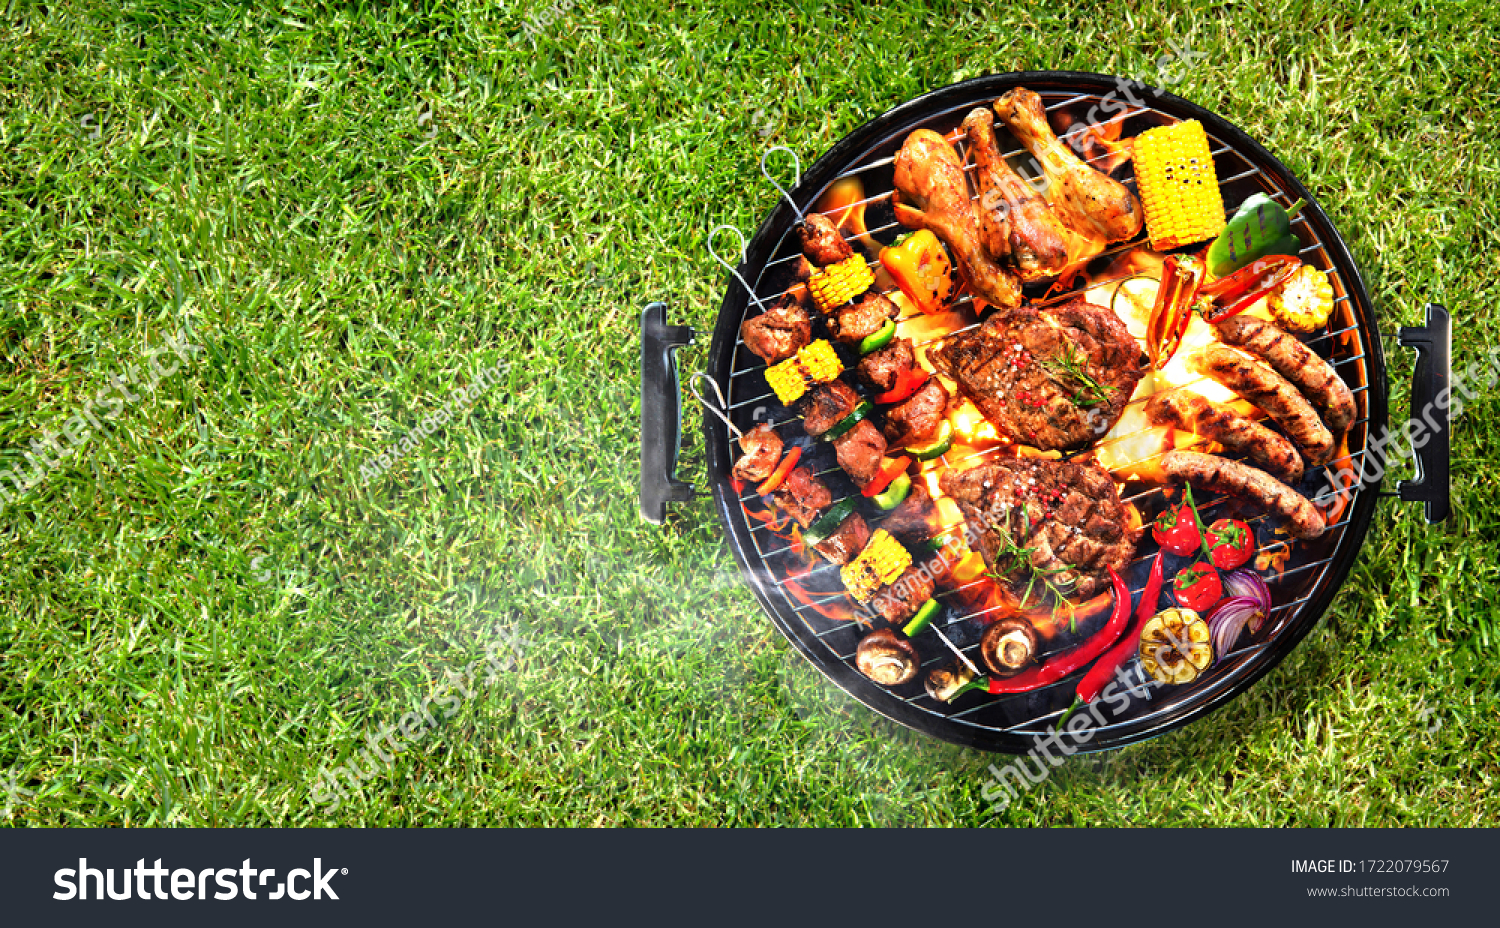 Top view of assorted delicious grilled meat with vegetables on barbecue grill with smoke and flames in green grass #1722079567